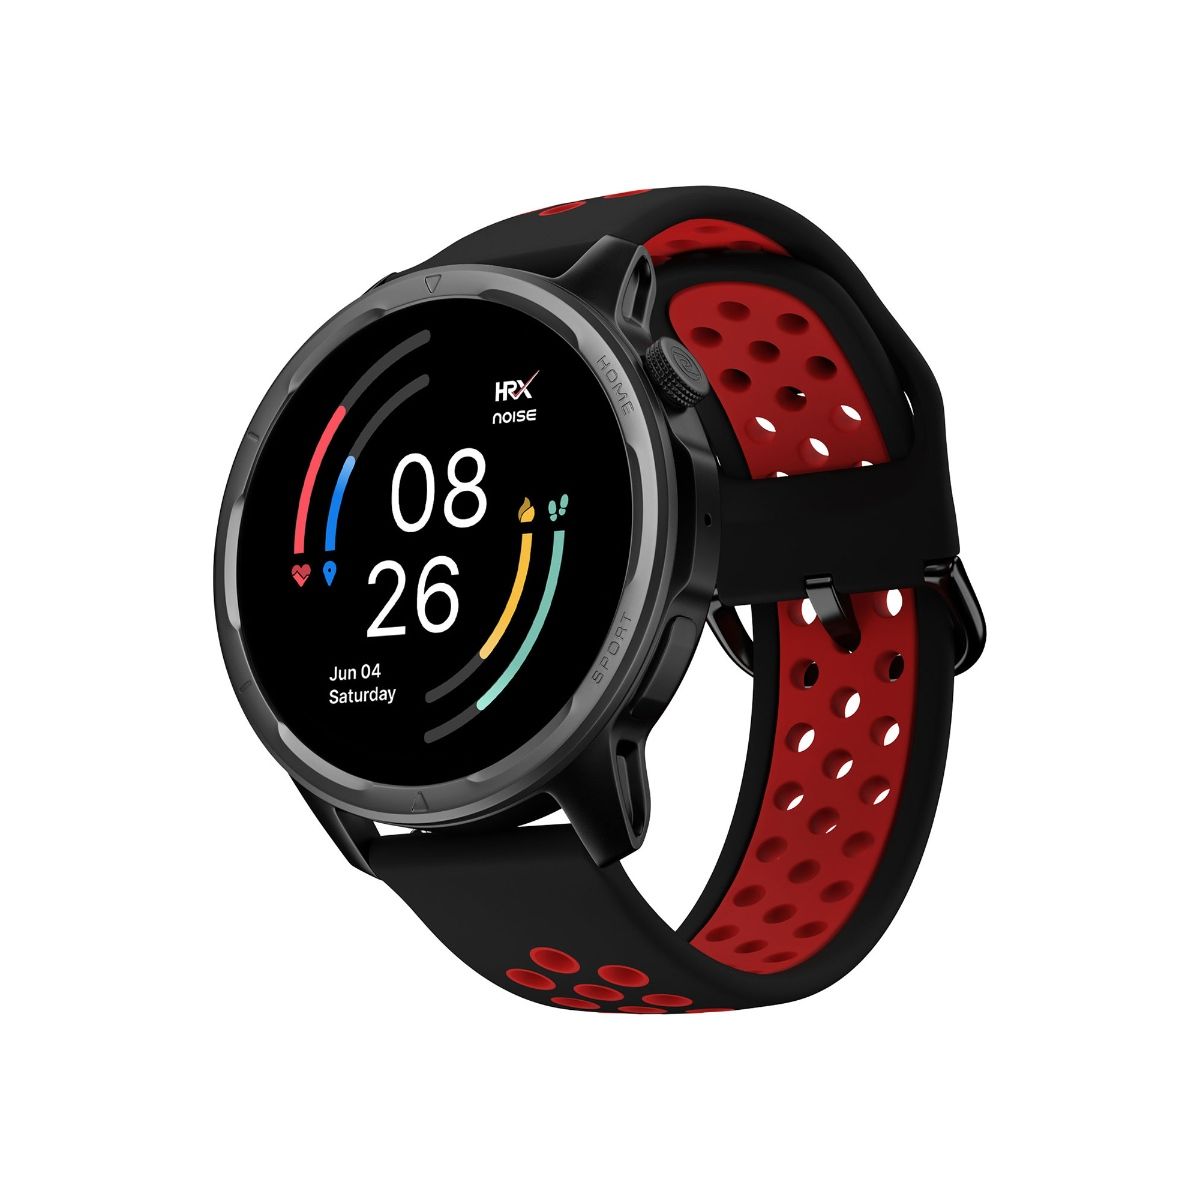 Noise HRX Bounce smartwatch with HD display and 100 sports modes launched  Check price and specifications - स्पोर्ट्स लवर्स को खूब पसंद आएगी Noise की  ये धांसू स्मार्टवॉच, कीमत है 2500 से